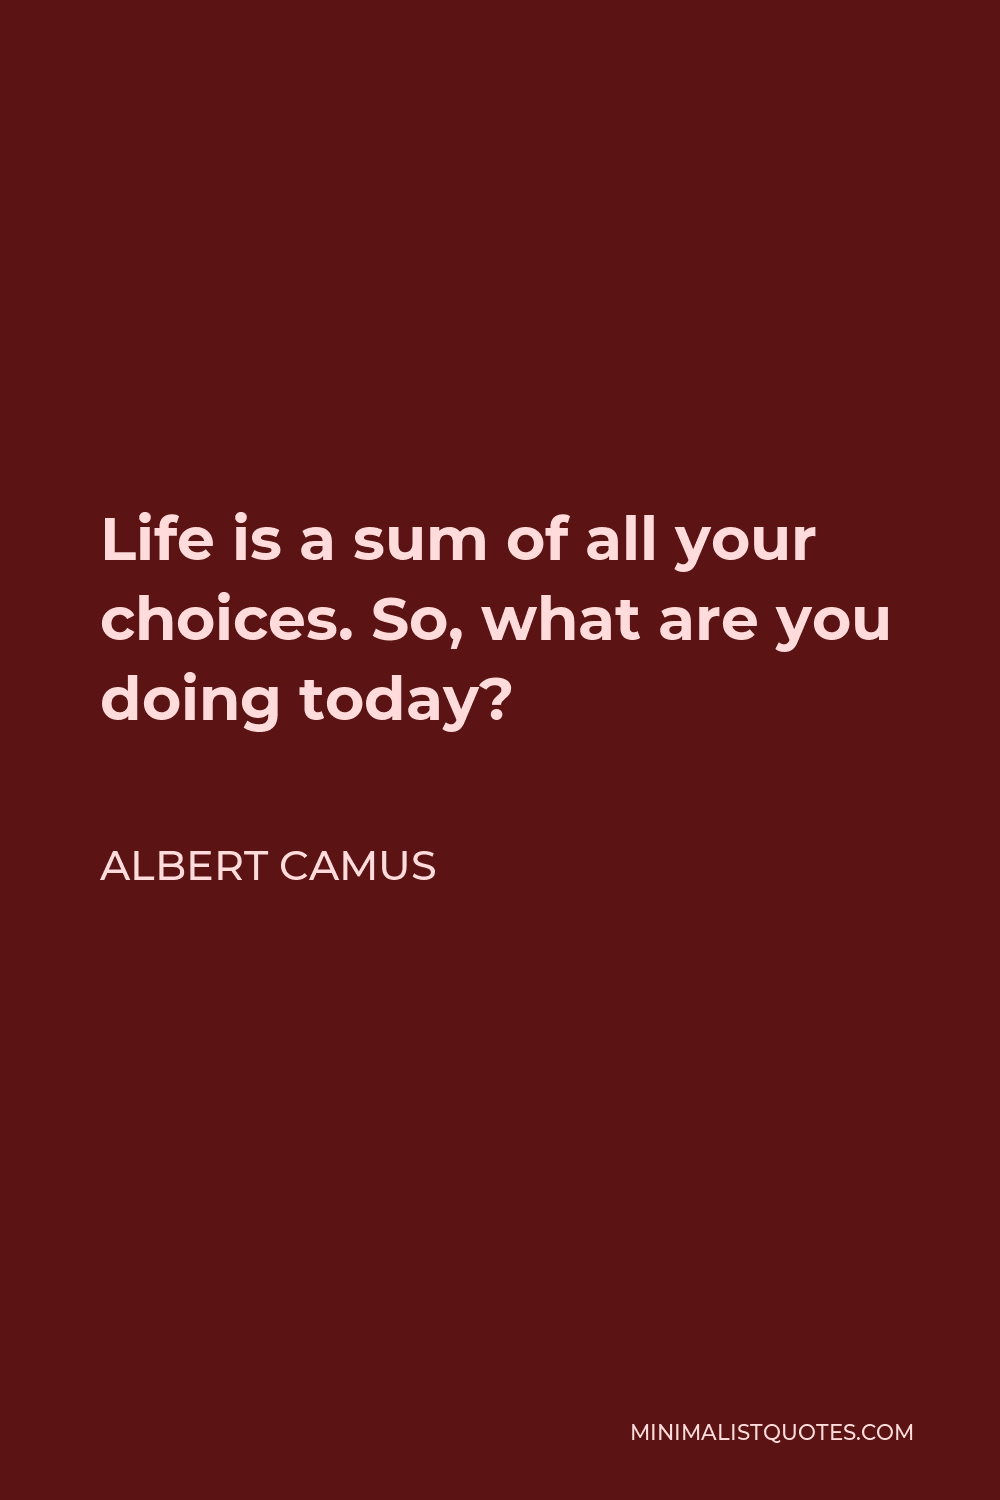 Albert Camus Quote - Life is a sum of all your choices. So, what are you doing today?